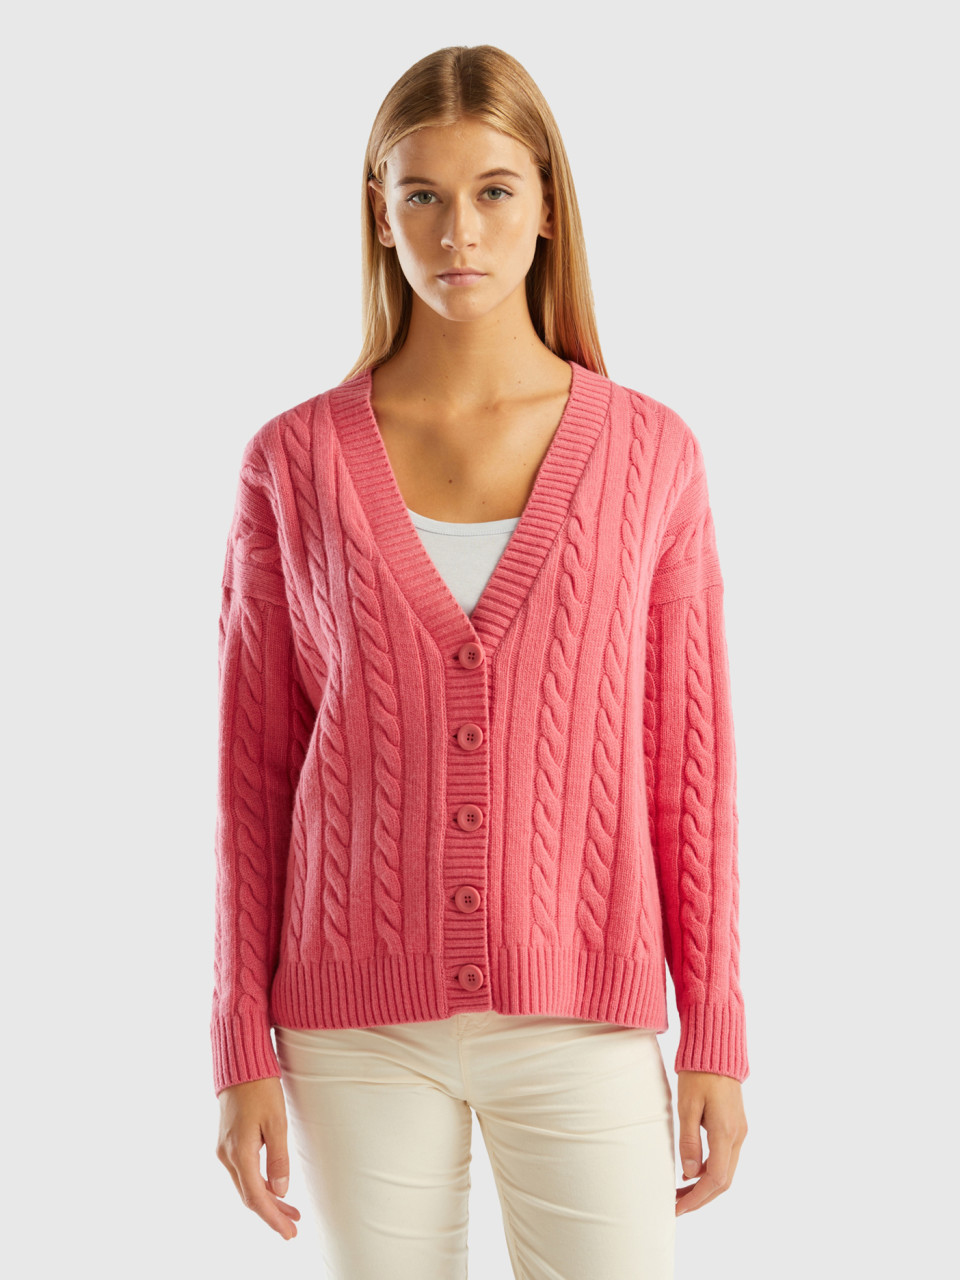 Benetton, Cardigan Over Fit Mit Zopfmuster, Pink, female